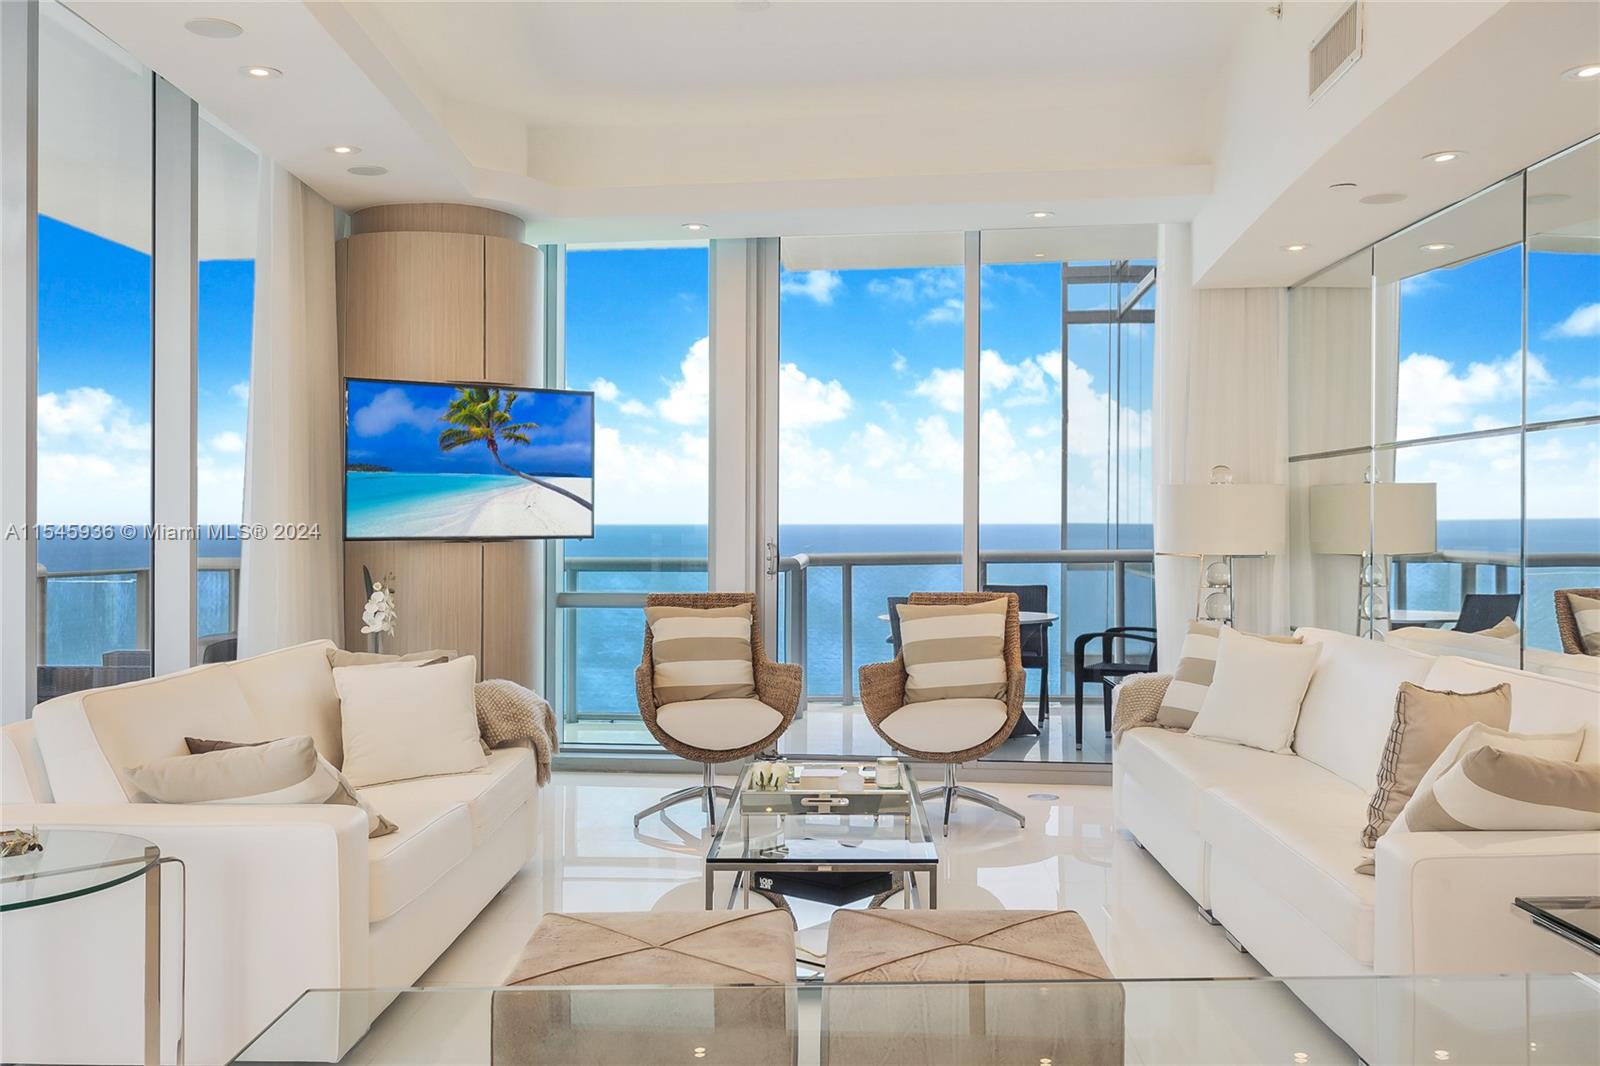 Stunning Corner Unit with Direct Ocean, Bay, and City Views! 3 Beds, 3 Full Baths, 1 Half Bath for Guests, in Sunny Isles Beach's Most Luxurious Building by Architect Carlos Ott! Featured in DECOR Magazine, this unit was Professionally Decorated by INFINITY DESIGN, helmed by Ronny Constansi. Boasting a Spacious 1,956 SF, Vast Terraces, Private Elevator Entry, Breathtaking Floor-To-Ceiling High-Impact Glass Windows, Smart Home Technology, Automated Window Treatments, Surround Sound, Marble Floors, and Top-of-the-Line Appliances. Offered Furnished or Unfurnished. Amenities: Two Edge Infinity Pools, Fitness Center, Private Cinema, Children's Playroom, 24/7 Concierge Services, Private Beach Club, and Spa with Lounge Area. Experience Luxury Living in Sunny Isles Beach's Prime Location!